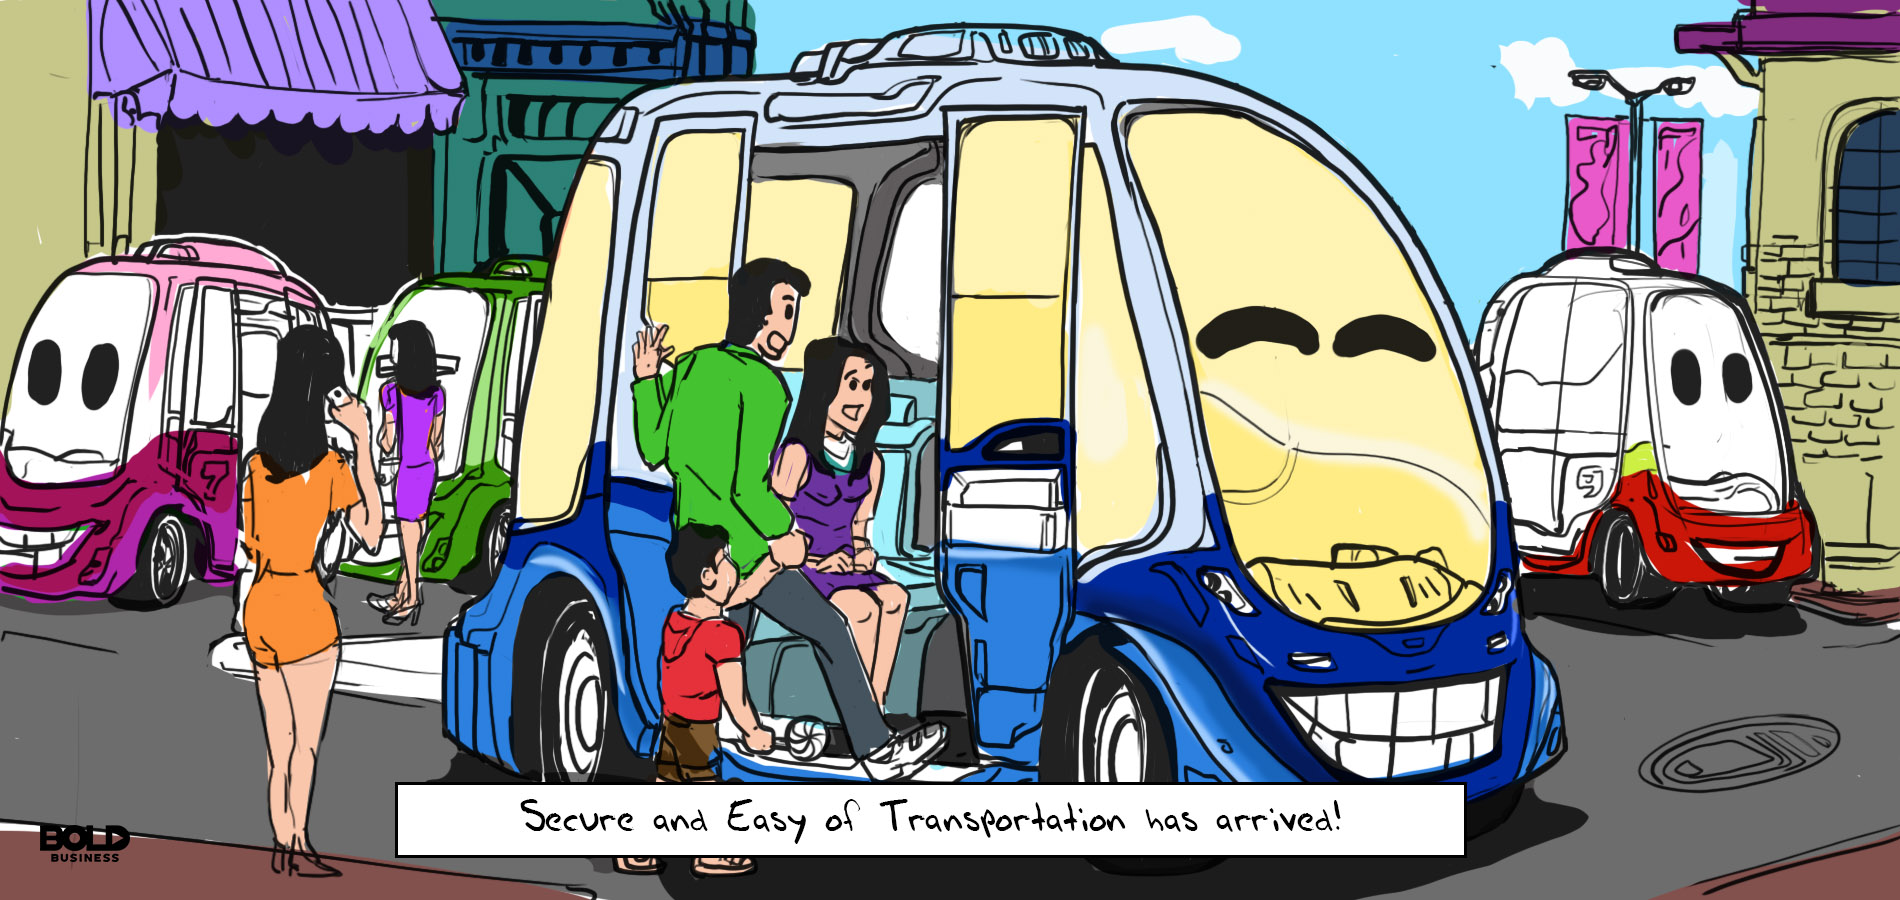 cartoon of commuters boarding on a self-driving public vehicle